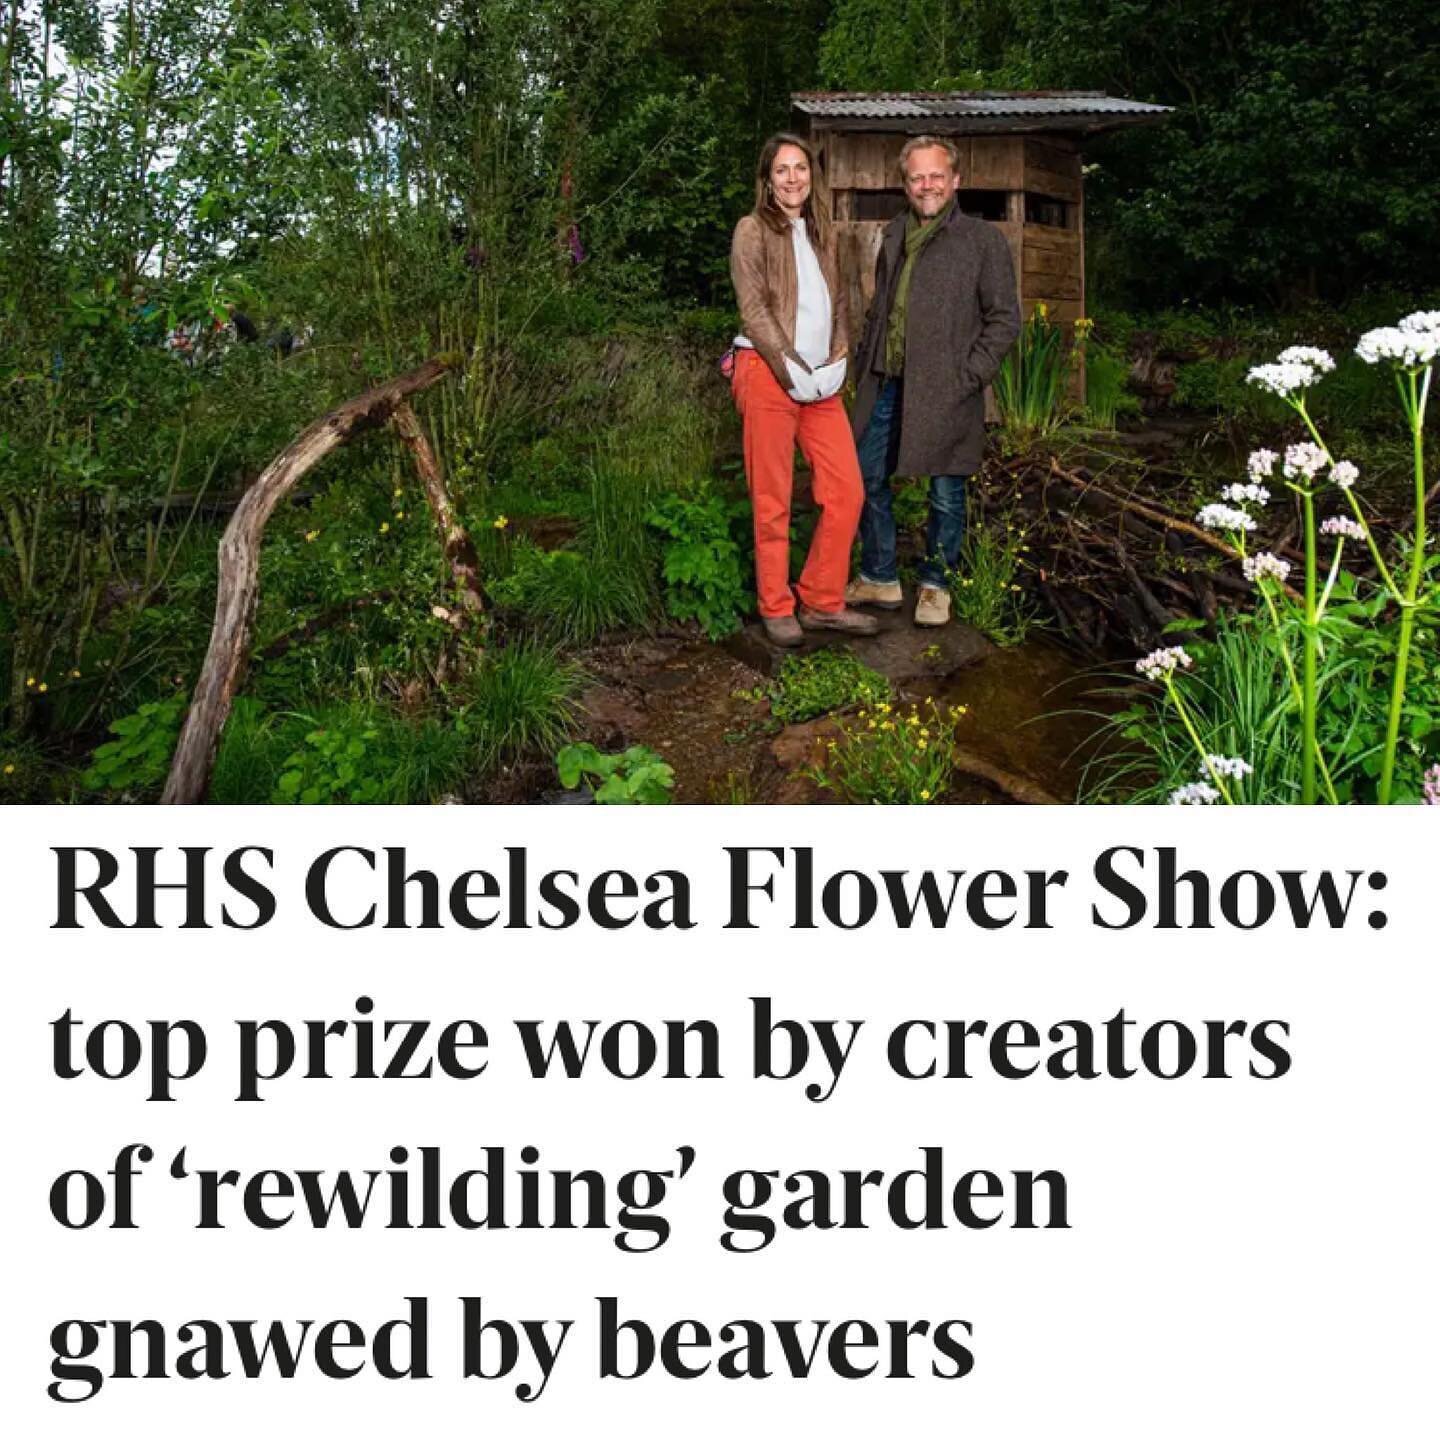 Amazing!!! We love beavers after spending the day with @beavertrust  Congratulations @urquhart_hunt @lalandscapes 👏🏆🙌What a spectacular way to showcase how AMAZING  #beavers and #rewilding  are for restoring #nature 🦫🌼🌿

&ldquo;Gardeners love n